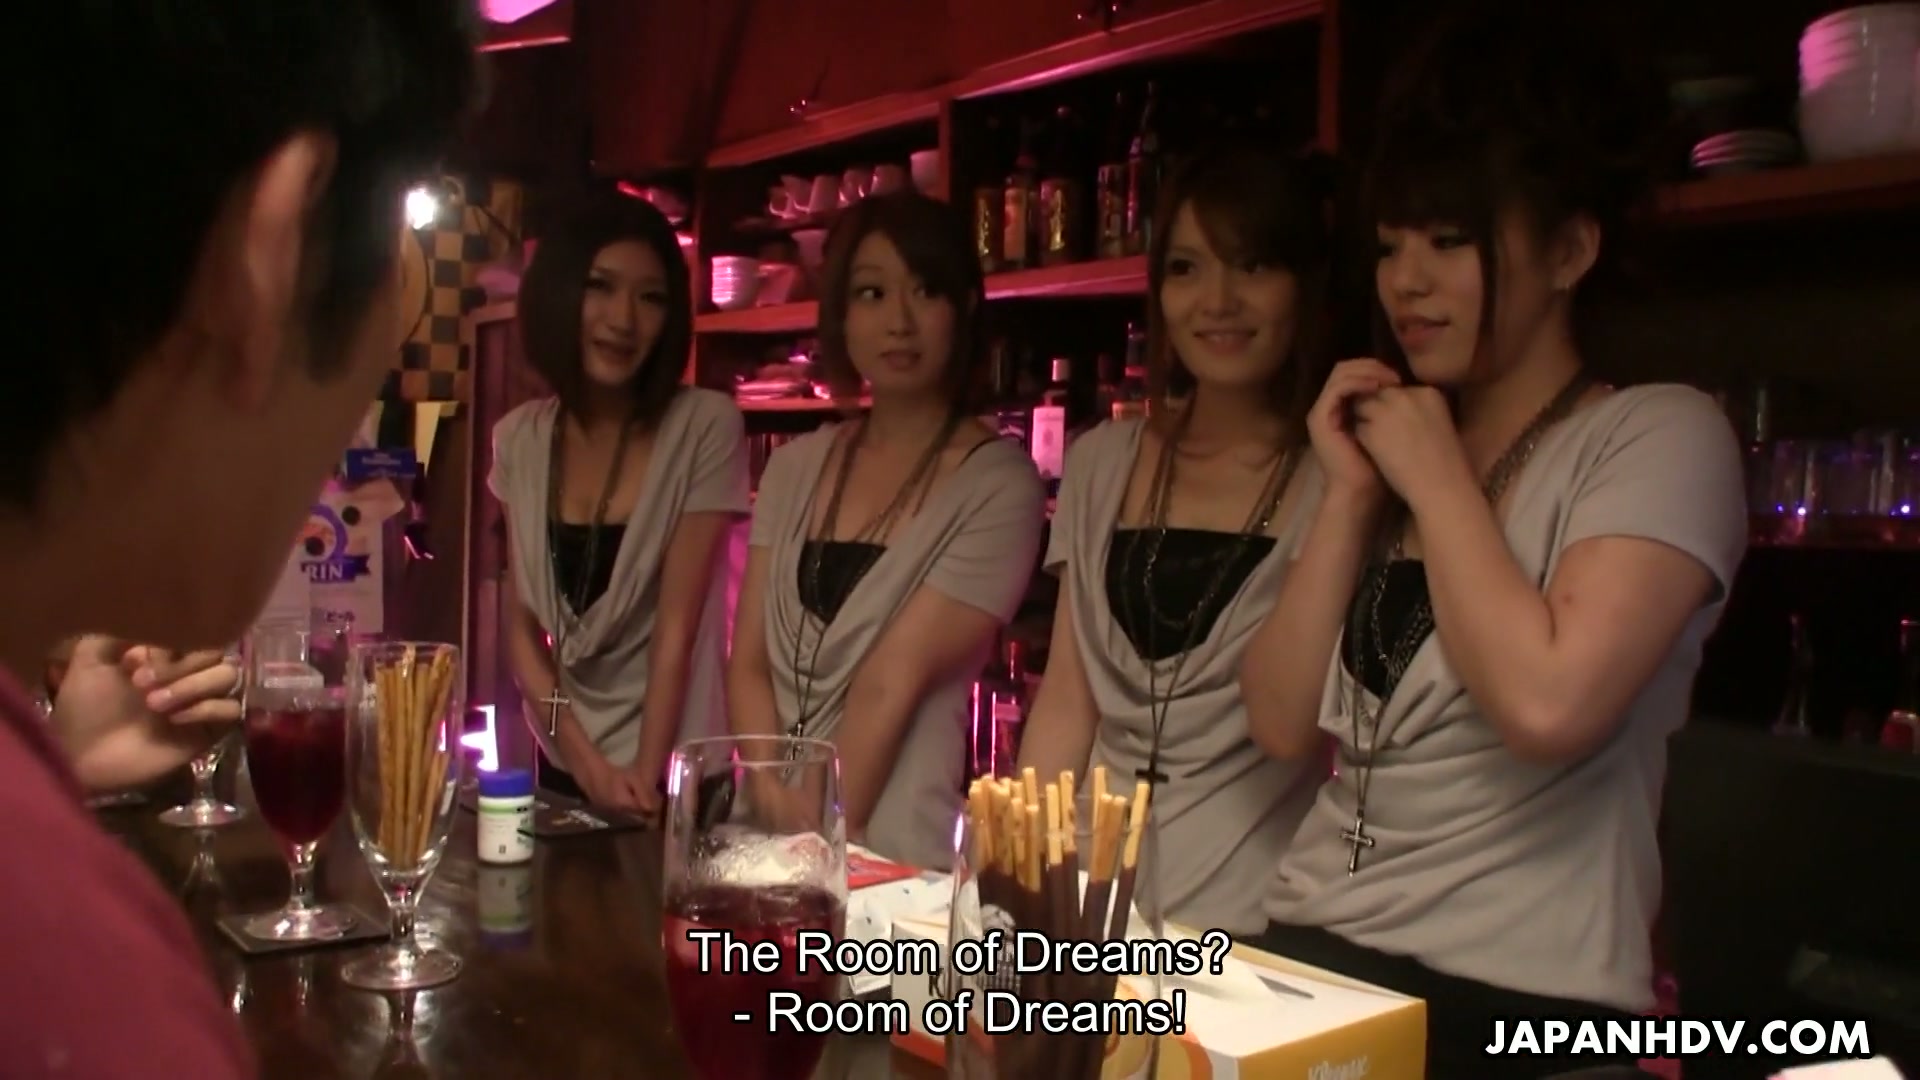 Four Asian bartenders invite clients into Dream Room for dirty orgy - AnySex.com Video